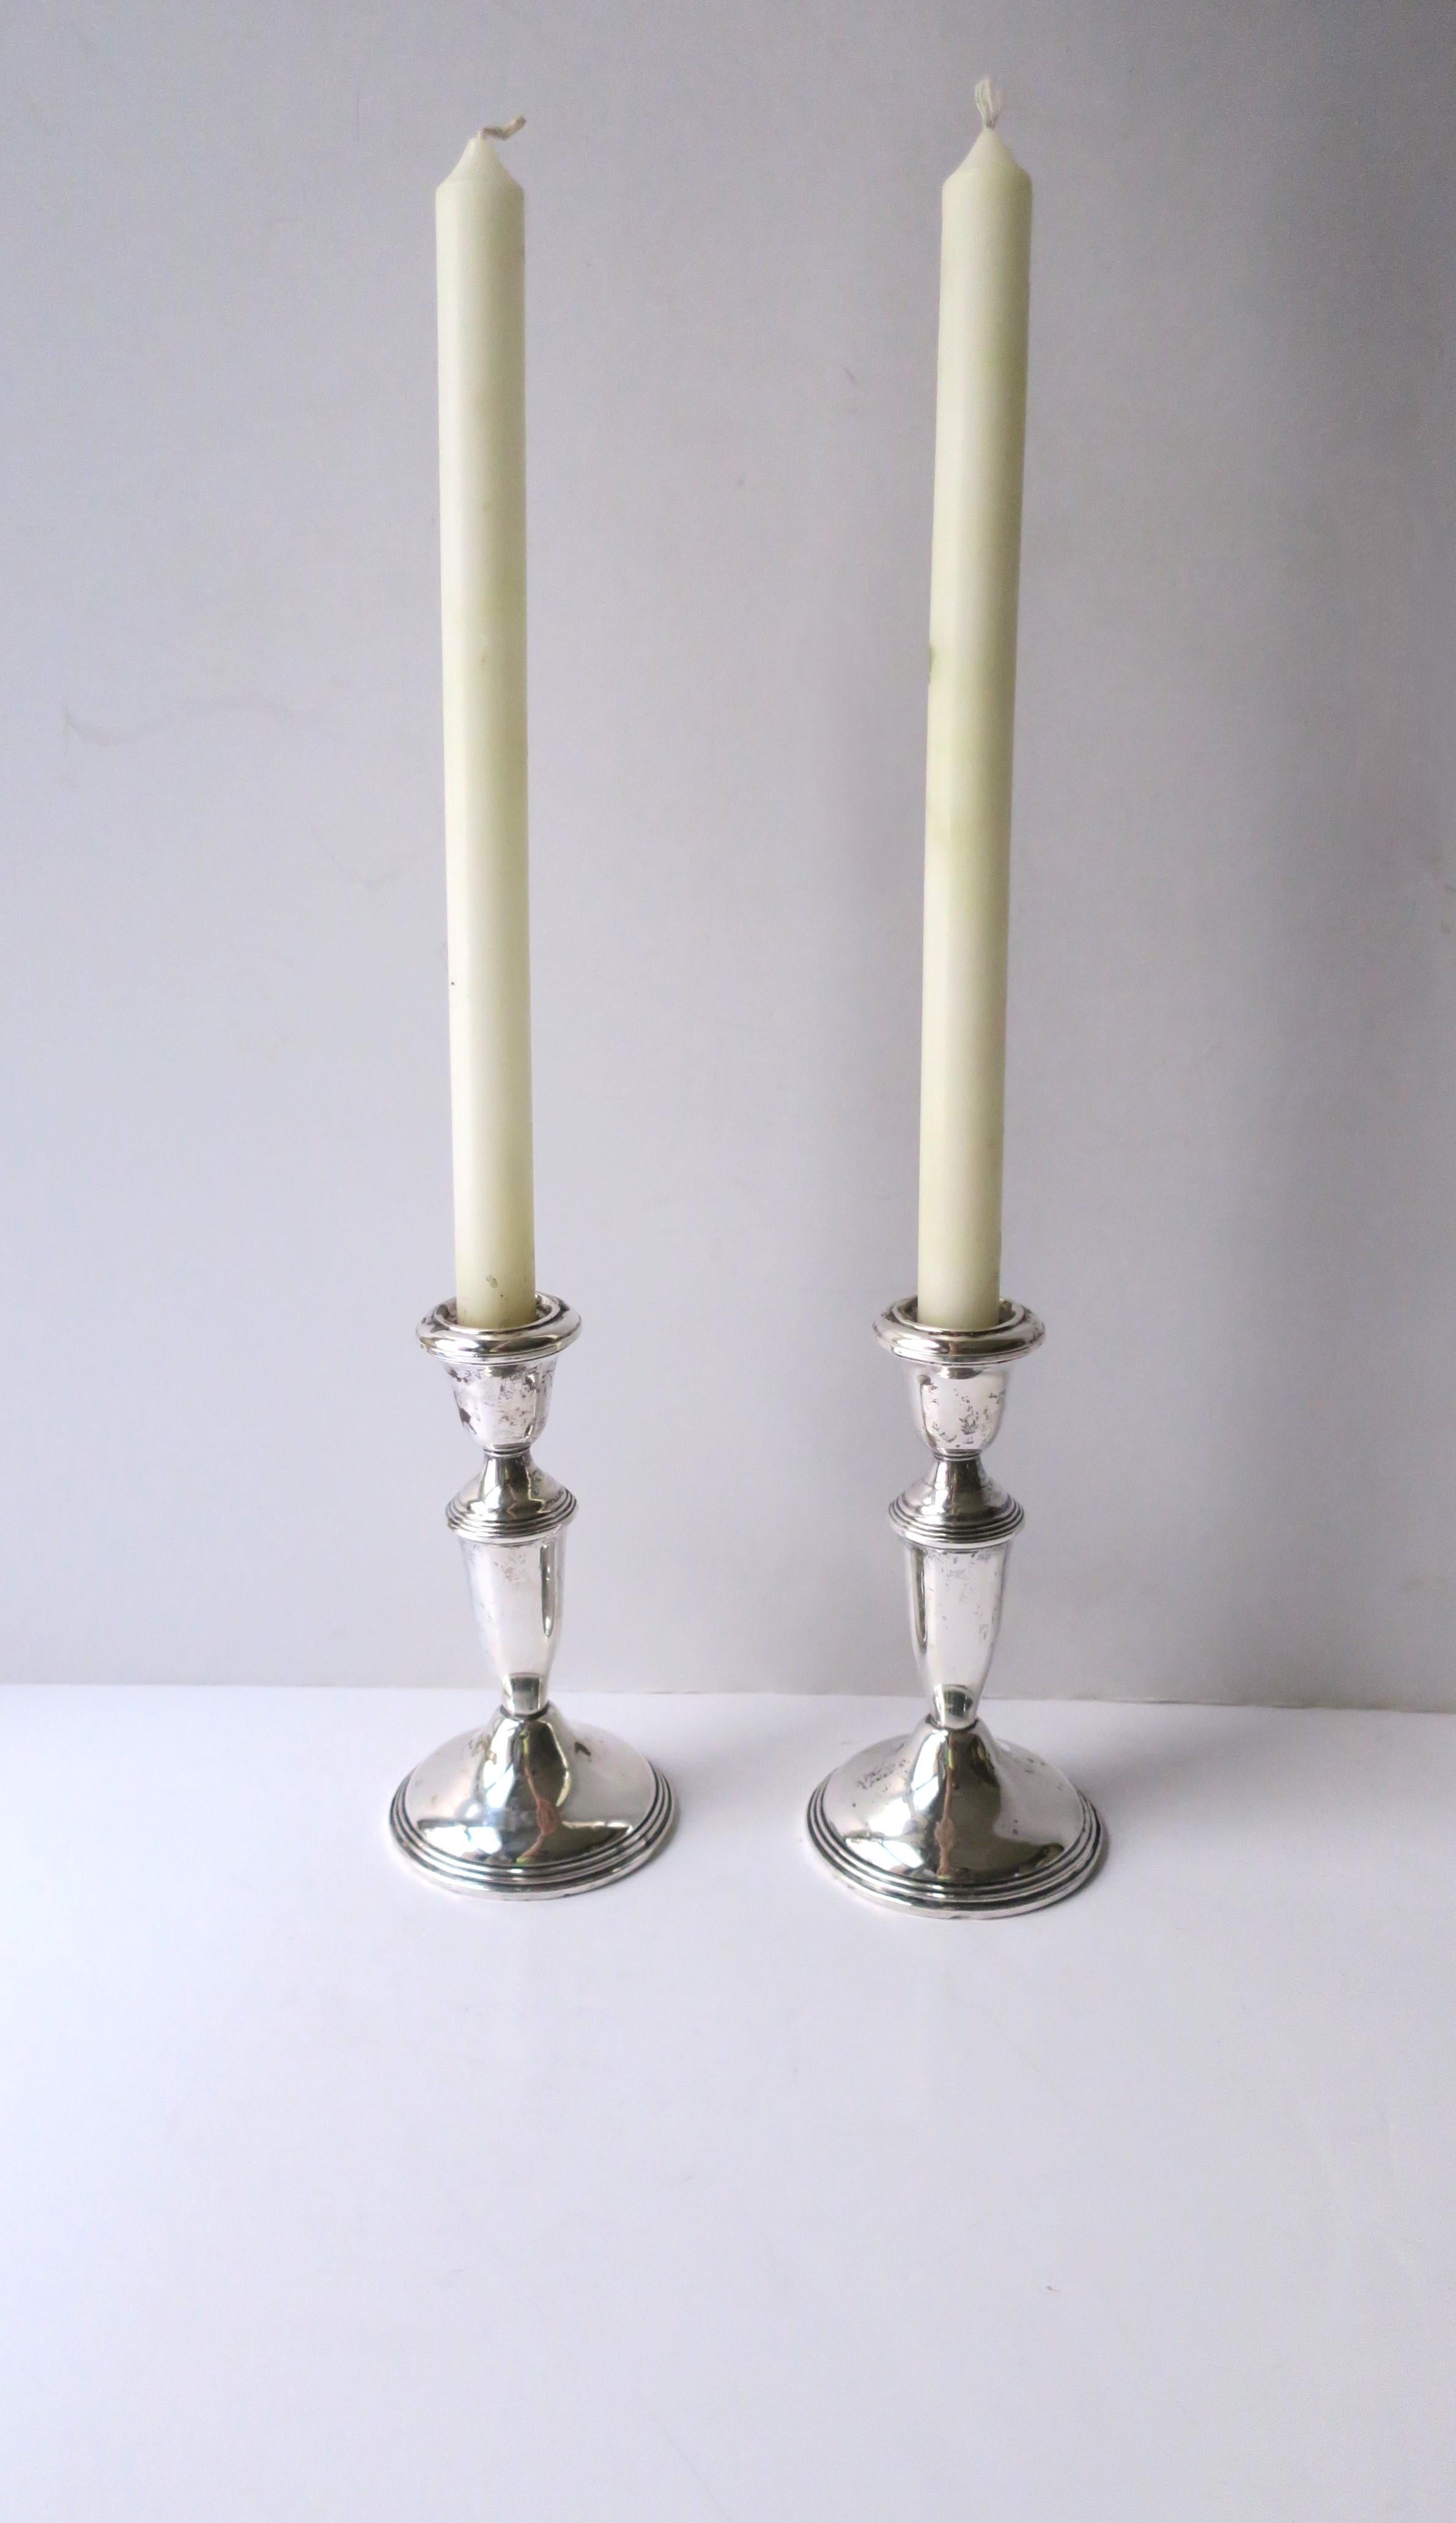 A pair (2) of sterling silver candlestick holders by Woodward & Lothrop, circa early-20th century, USA. A beautiful set with elegant details on candle cup, center, and circular edge base, all supported by a conical shaft. With marks' mark and